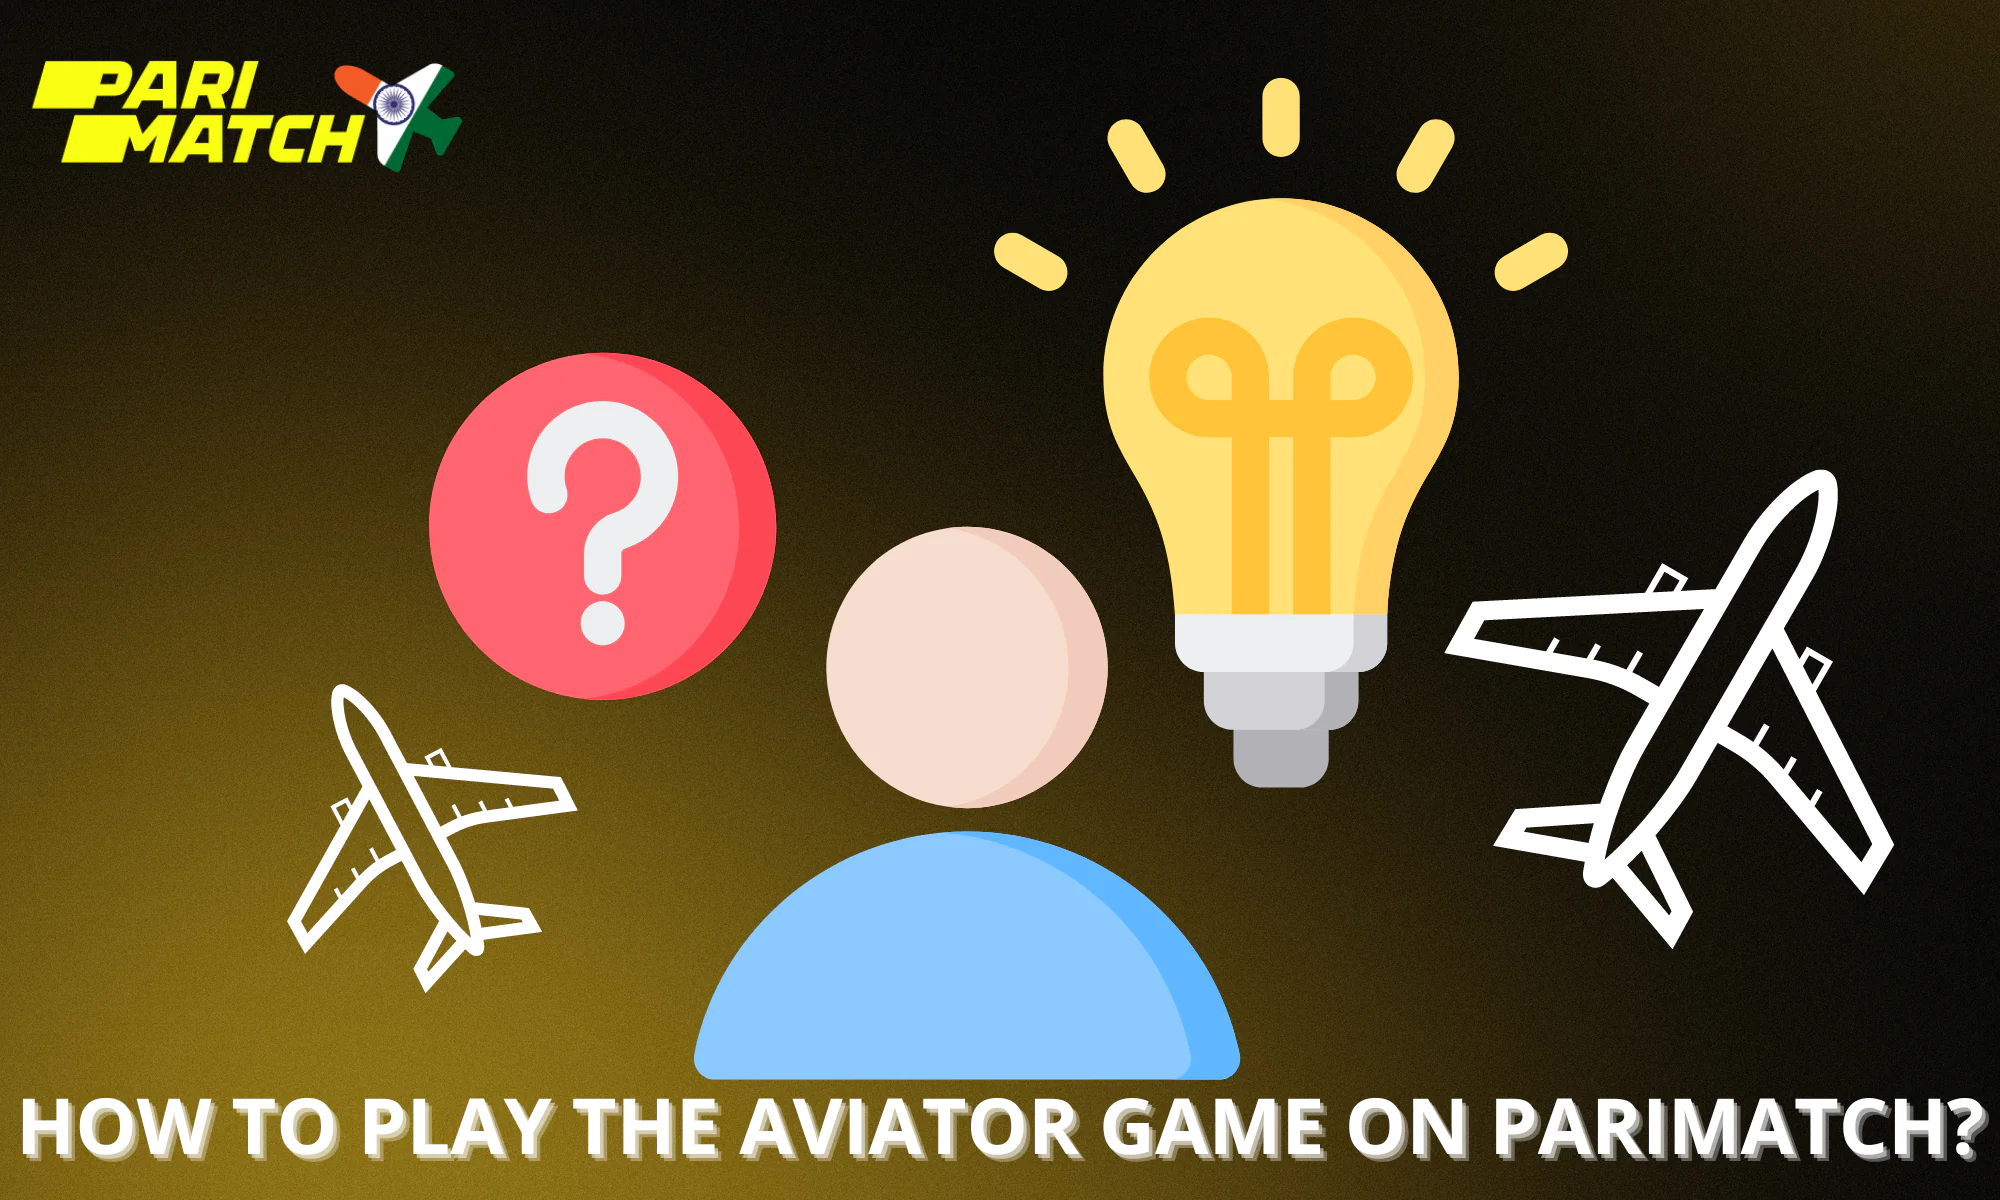 Read more how to start playing Aviator at Parimatch